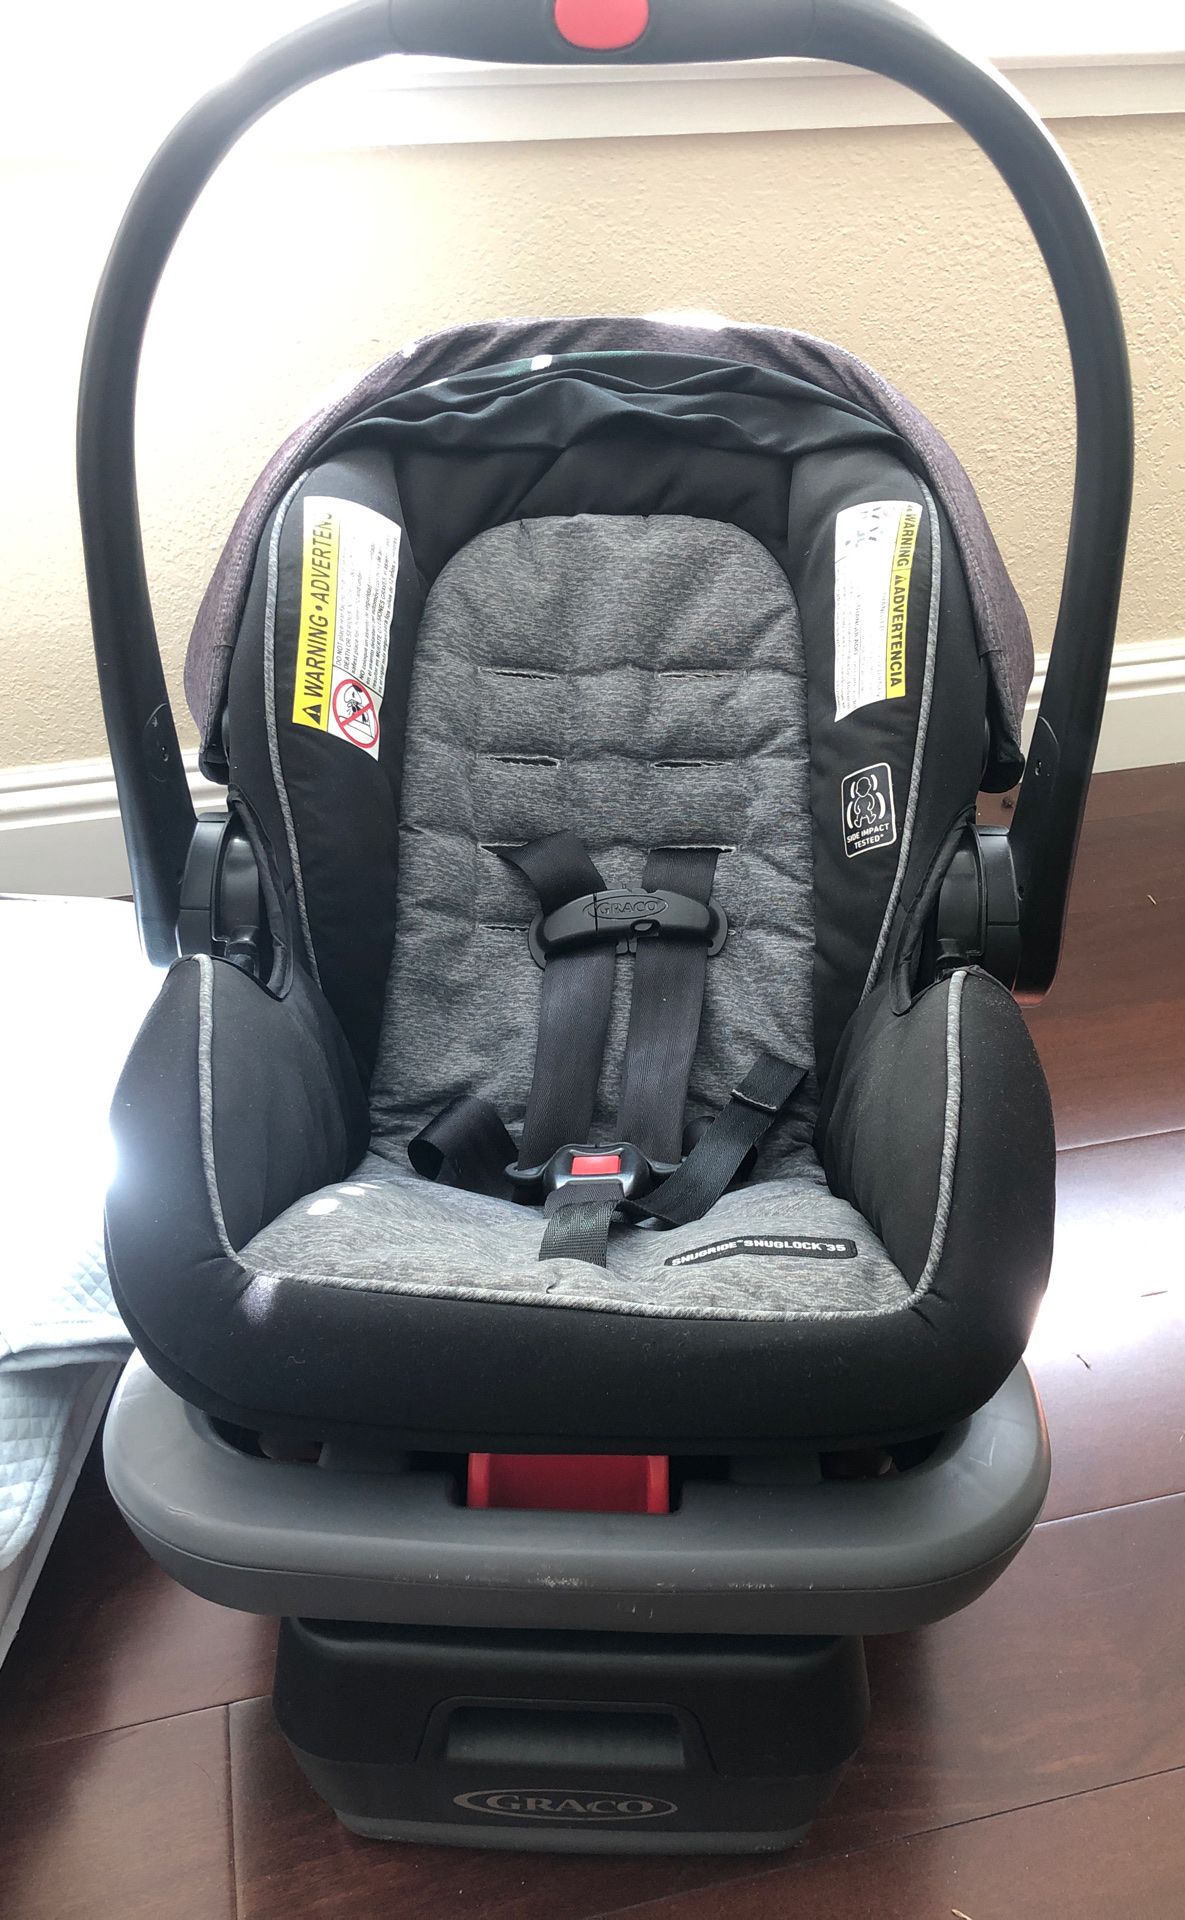 Grace infant car seat with free baby clothes